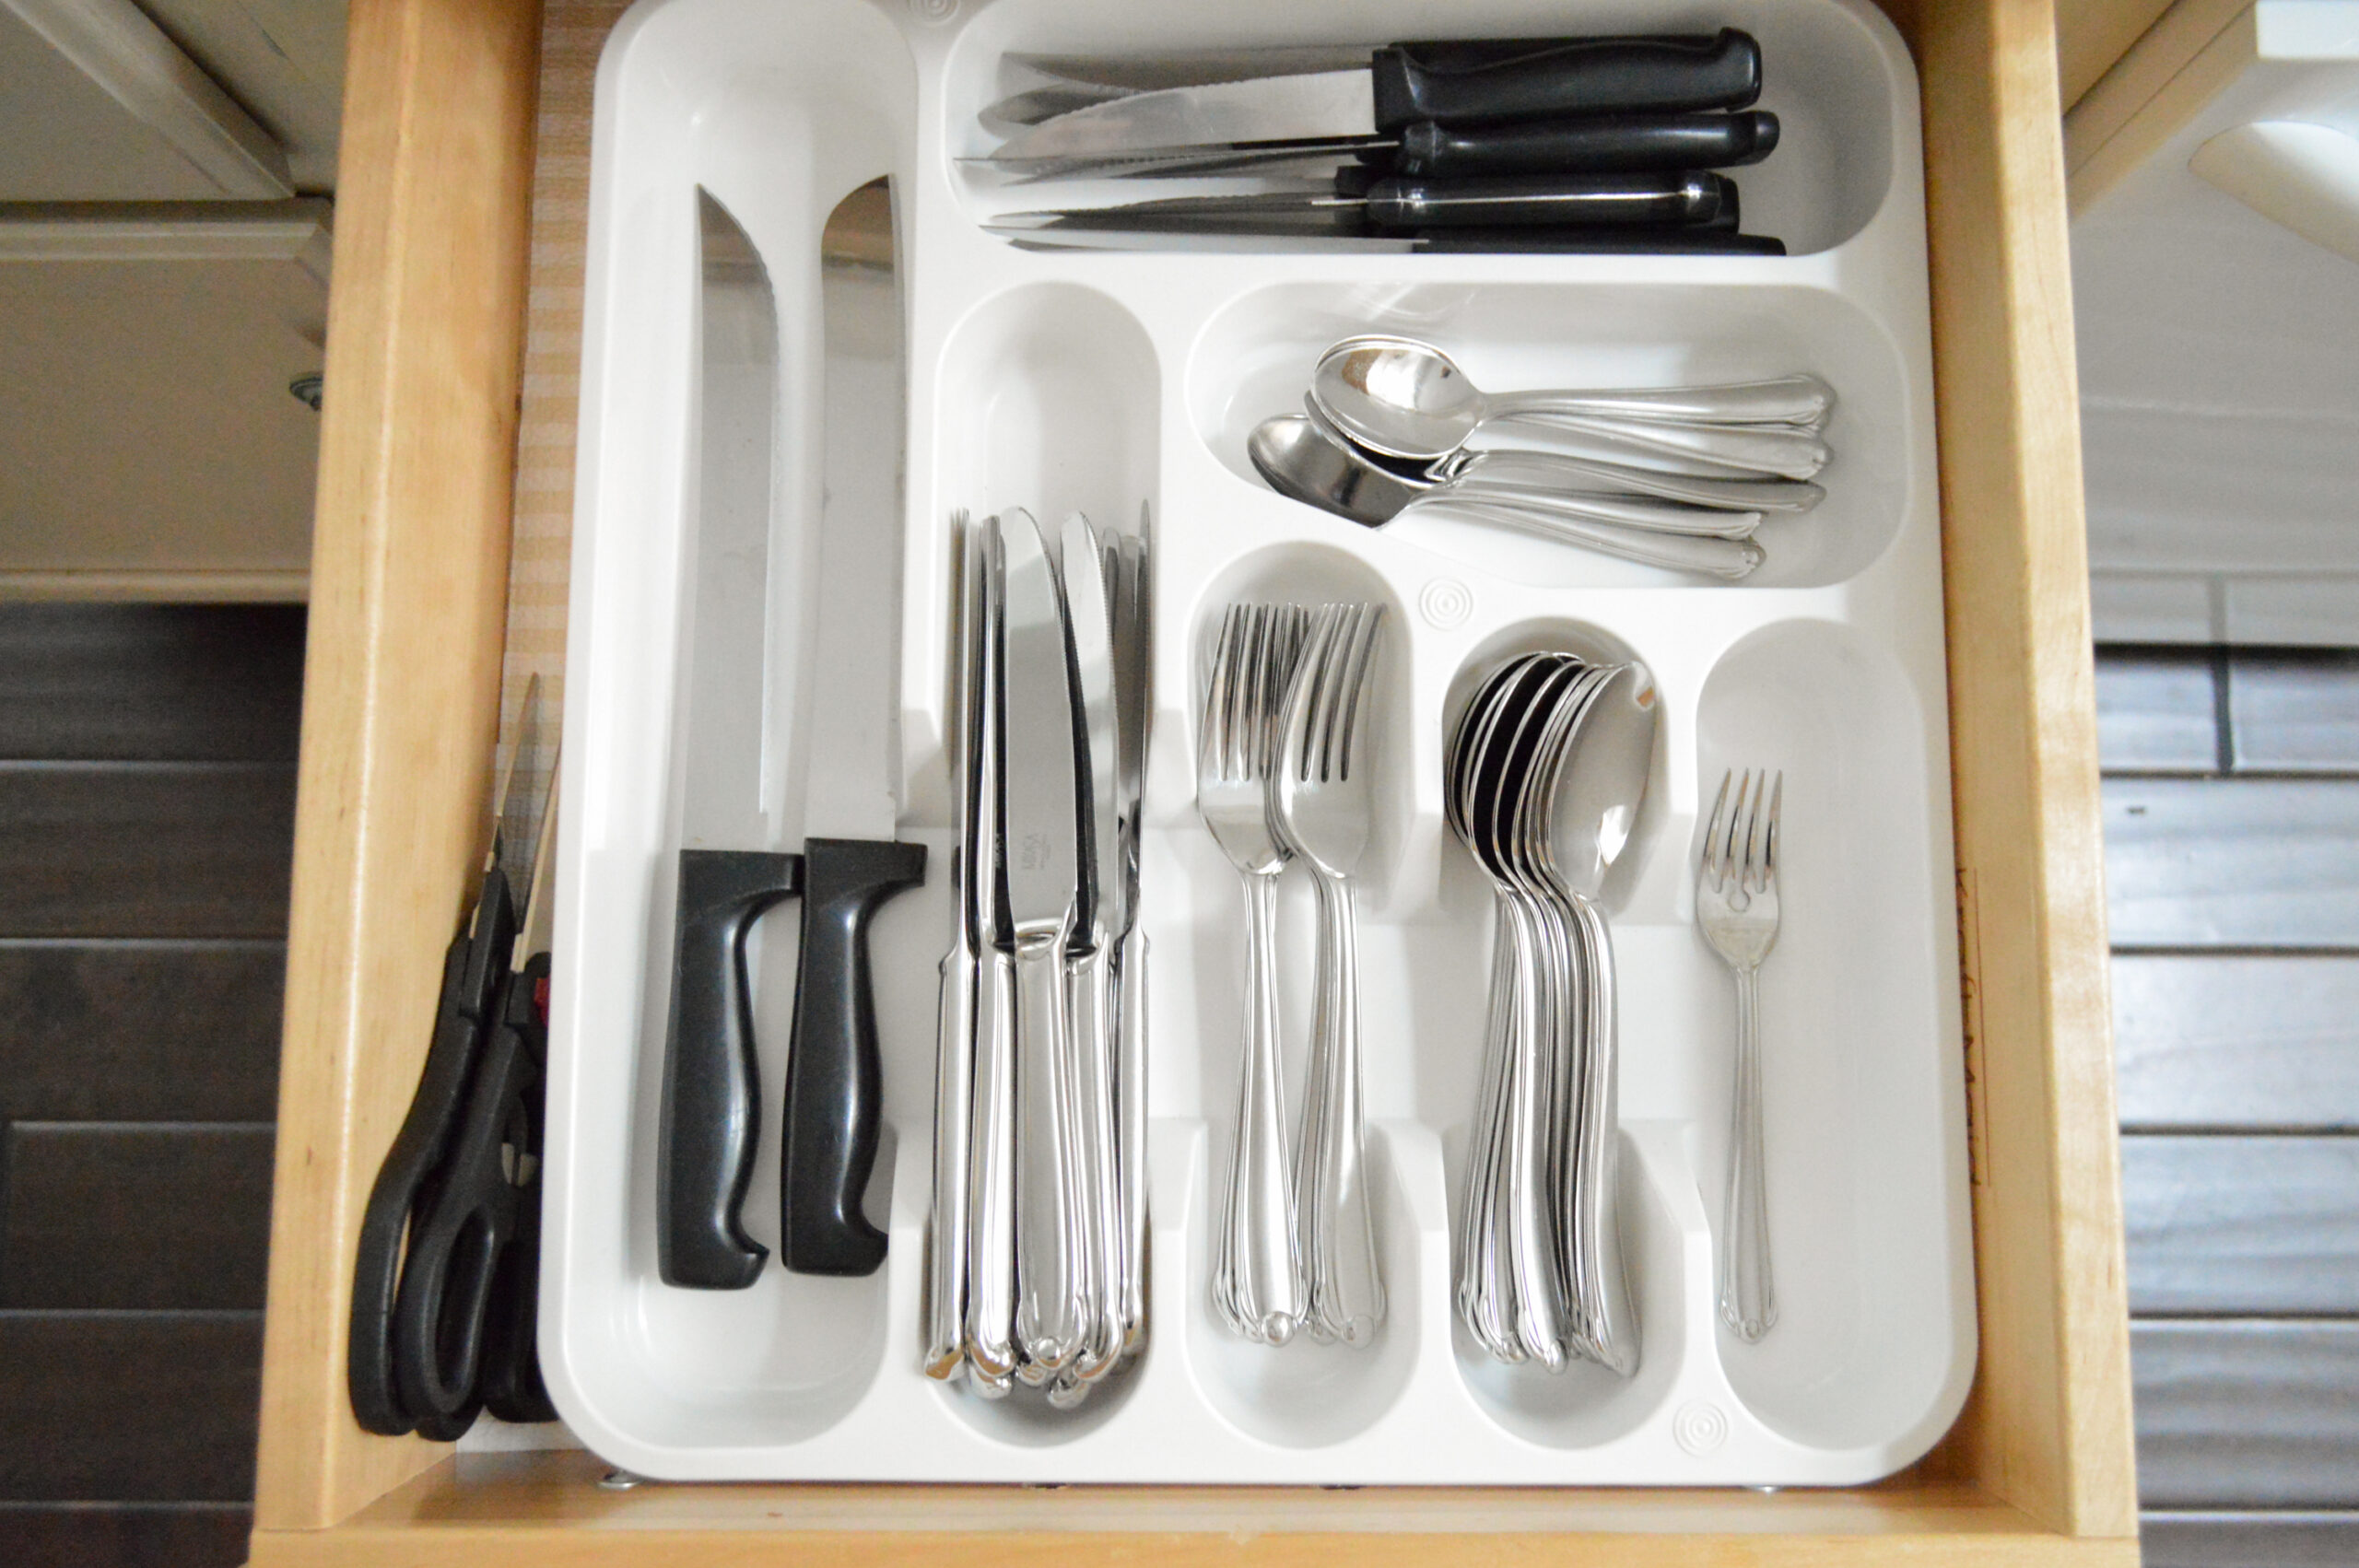 https://foxhollowcottage.com/wp-content/uploads/2021/01/Organizied-Utencil-Drawer-Counter-Storage-Ideas-Month-long-weekly-Cleaning-Organizing-event-with-Free-Printable-checklist-www.foxhollowcottage.com_-29-scaled.jpg